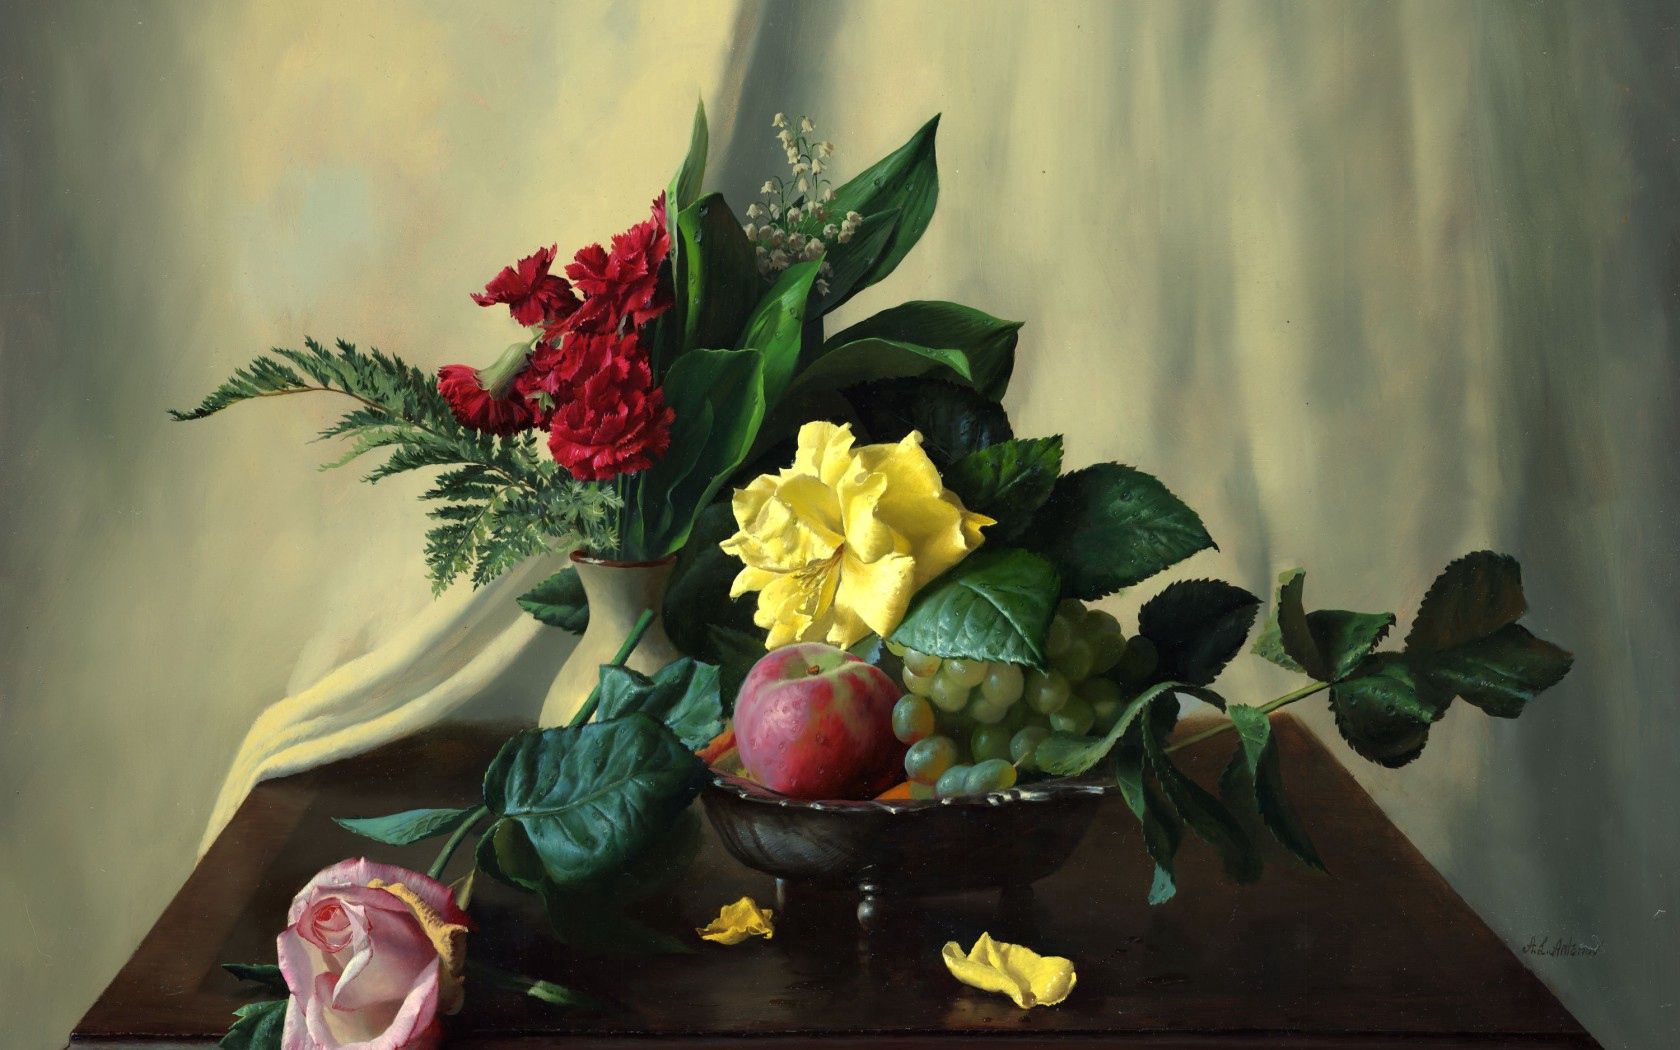 fruits, flowers, food, roses, apples, berries, lily of the valley, still life, carnations, fern, picture, table, side table